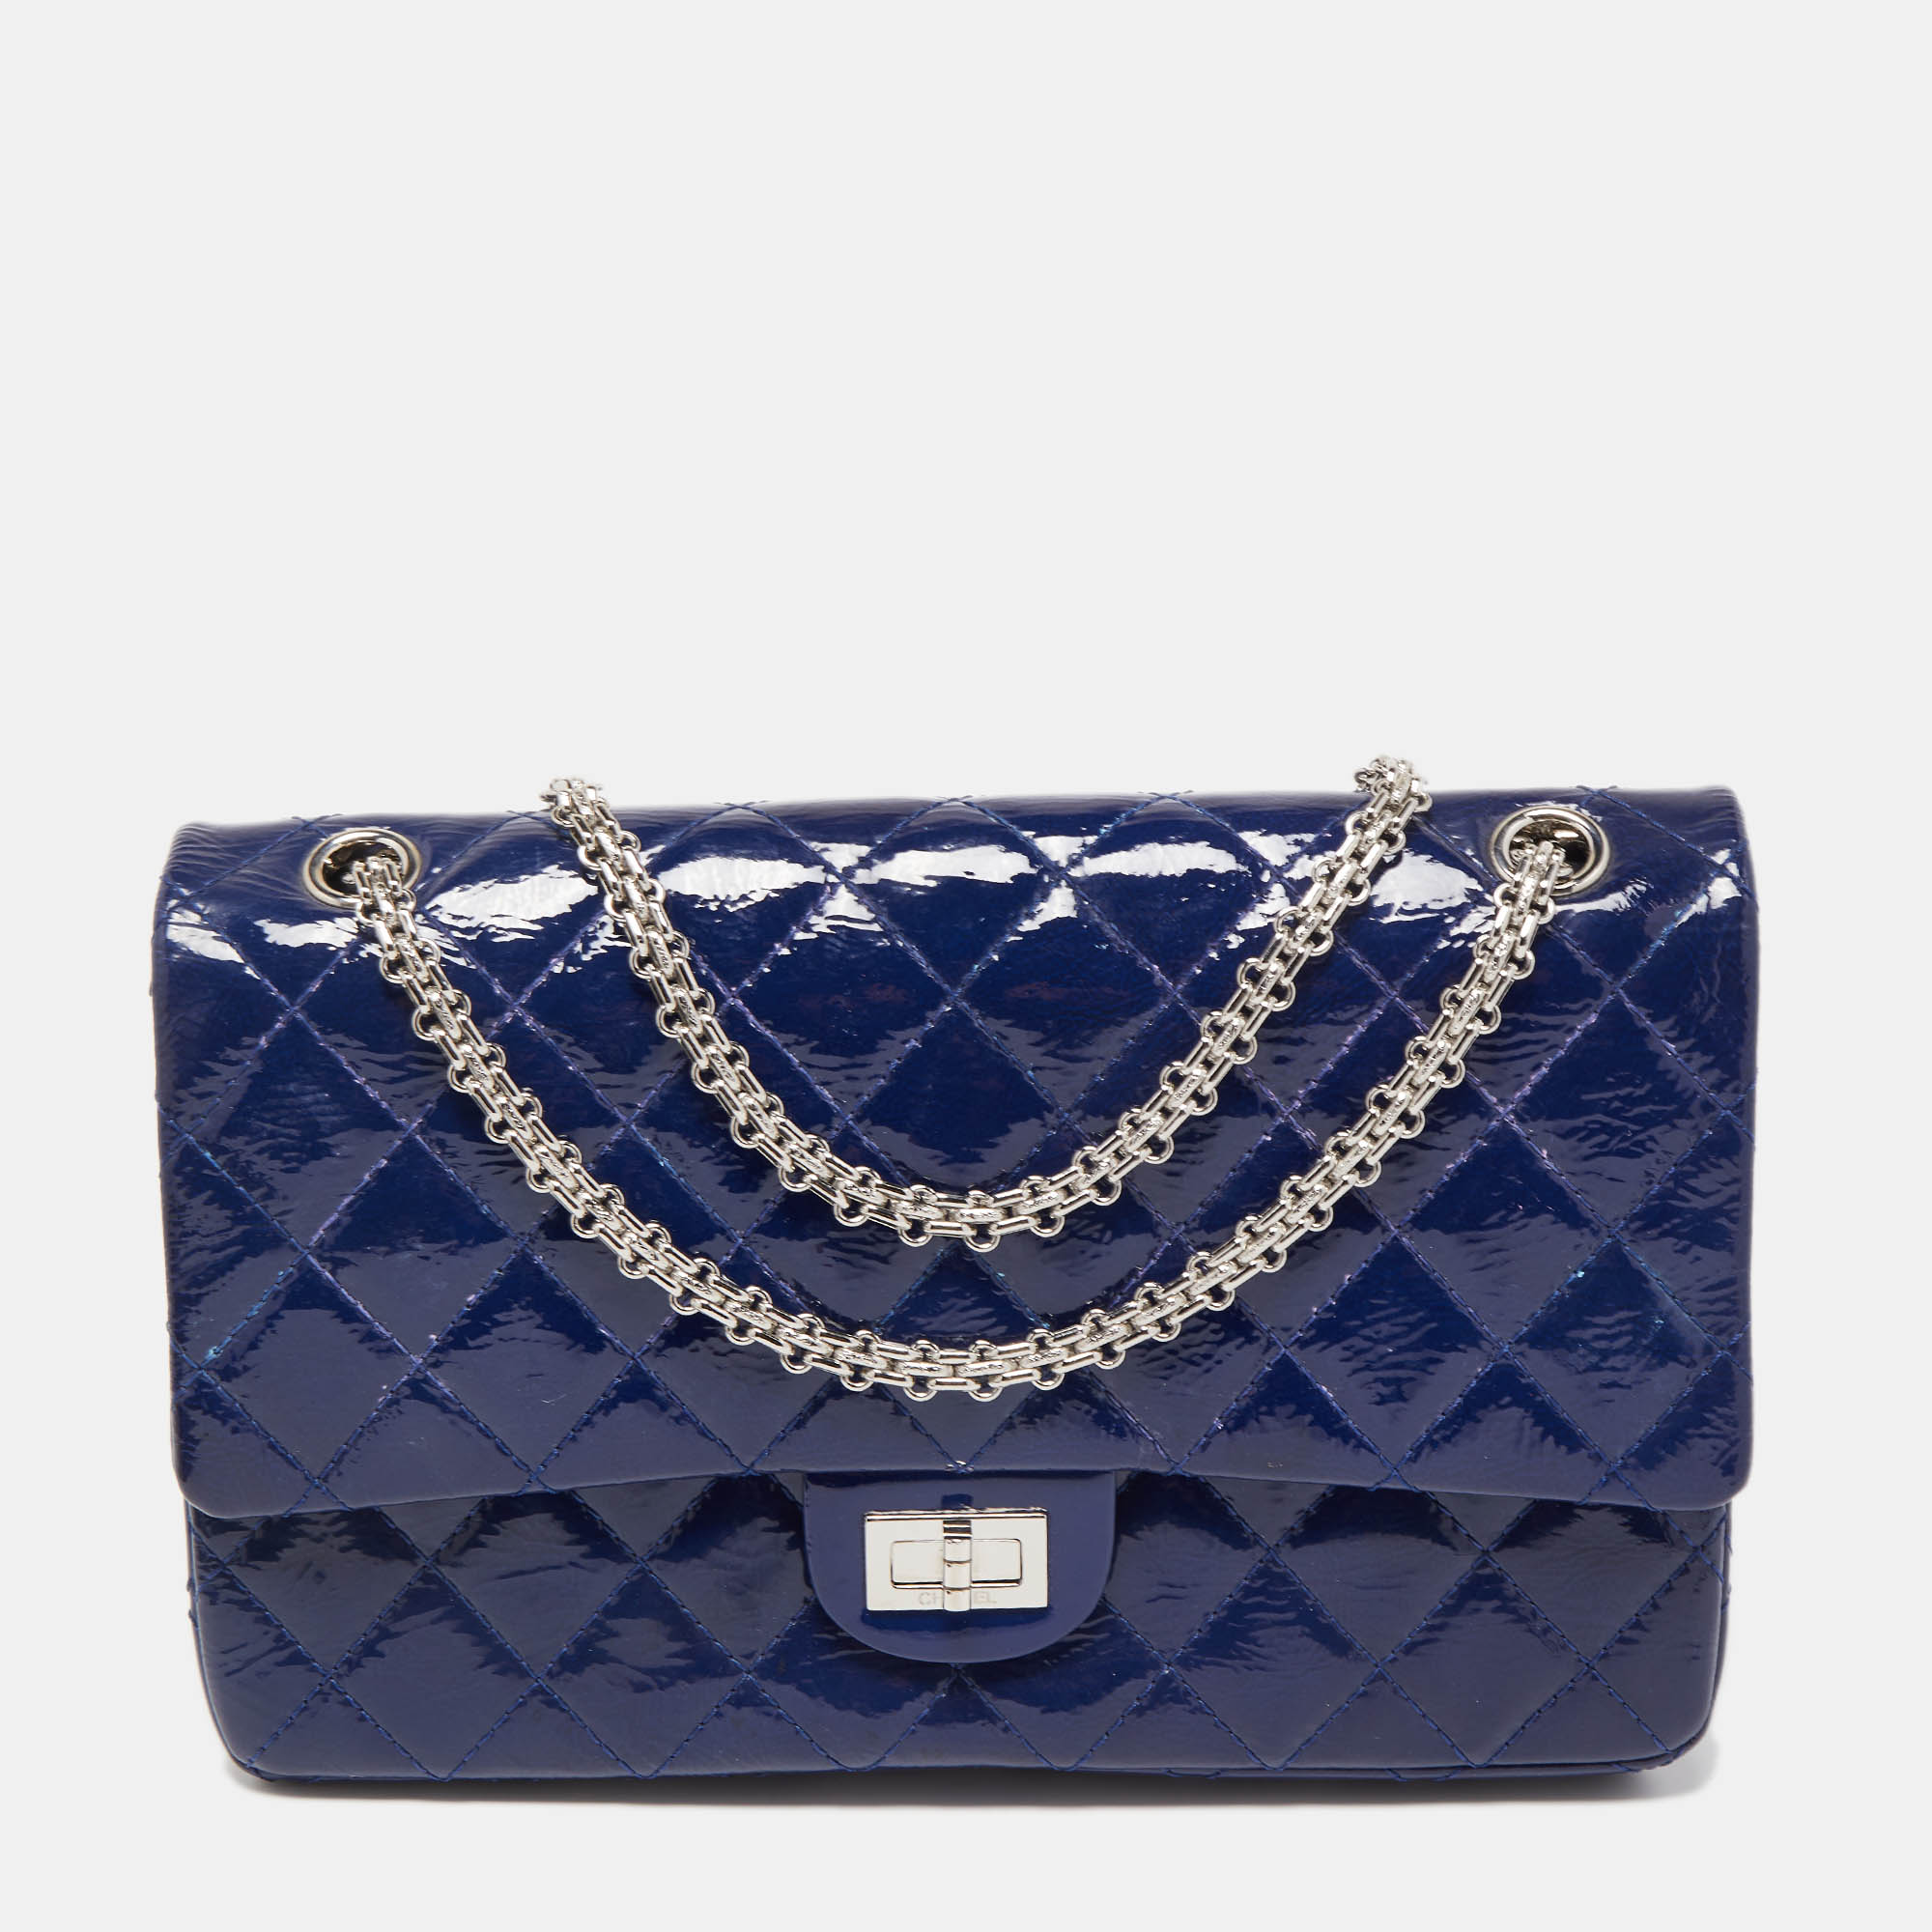 Pre-owned Chanel Blue Quilted Patent Leather Reissue 2.55 Classic 226 Flap Bag